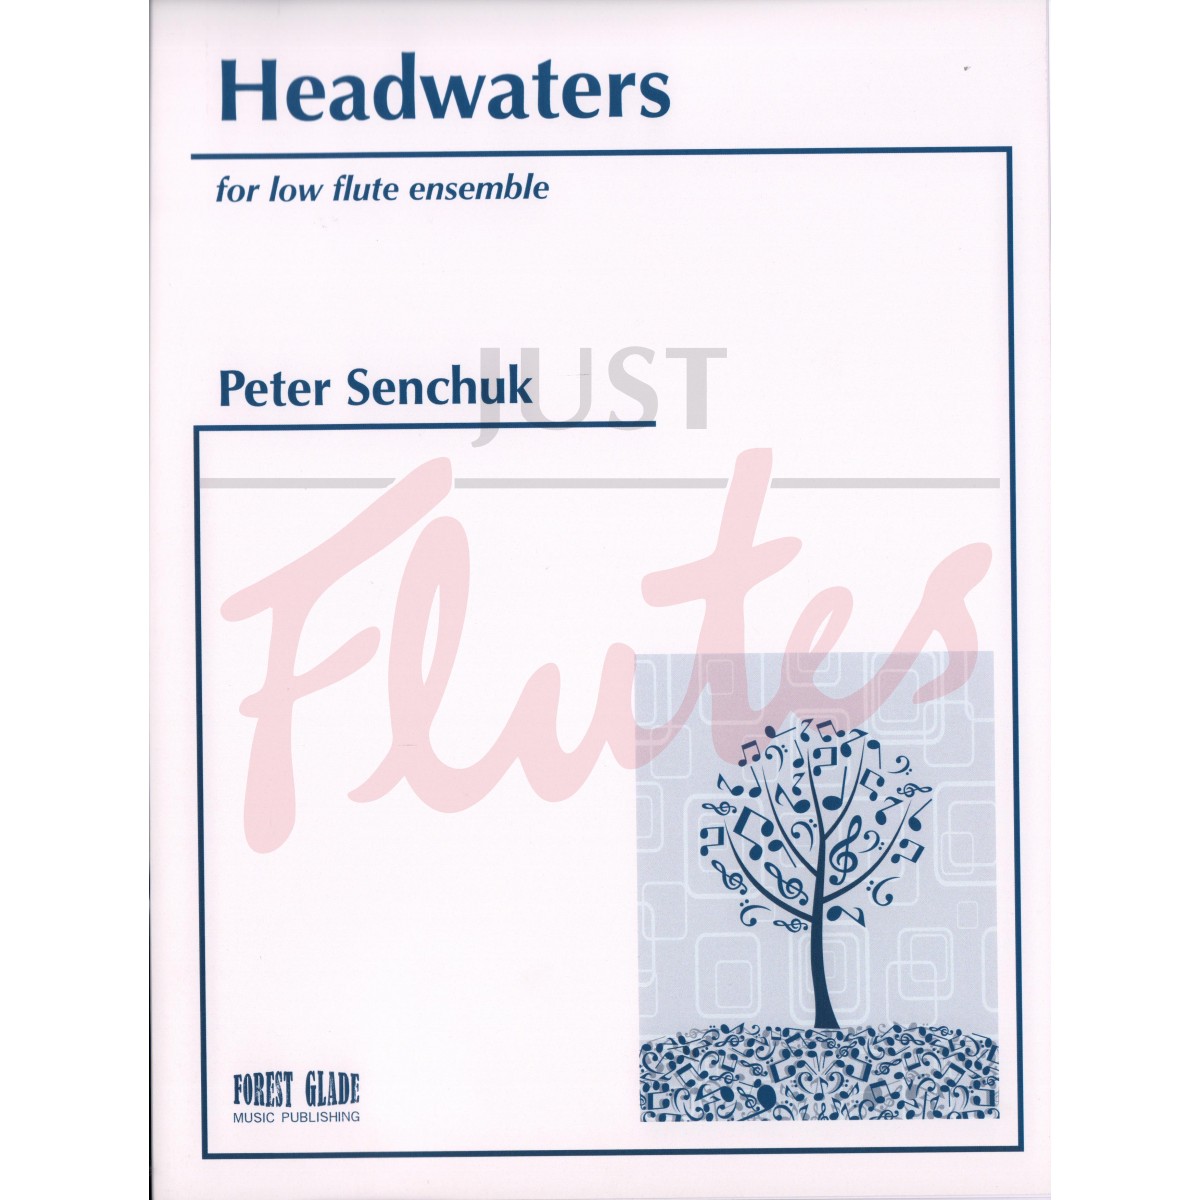 Headwaters for Low Flute Ensemble